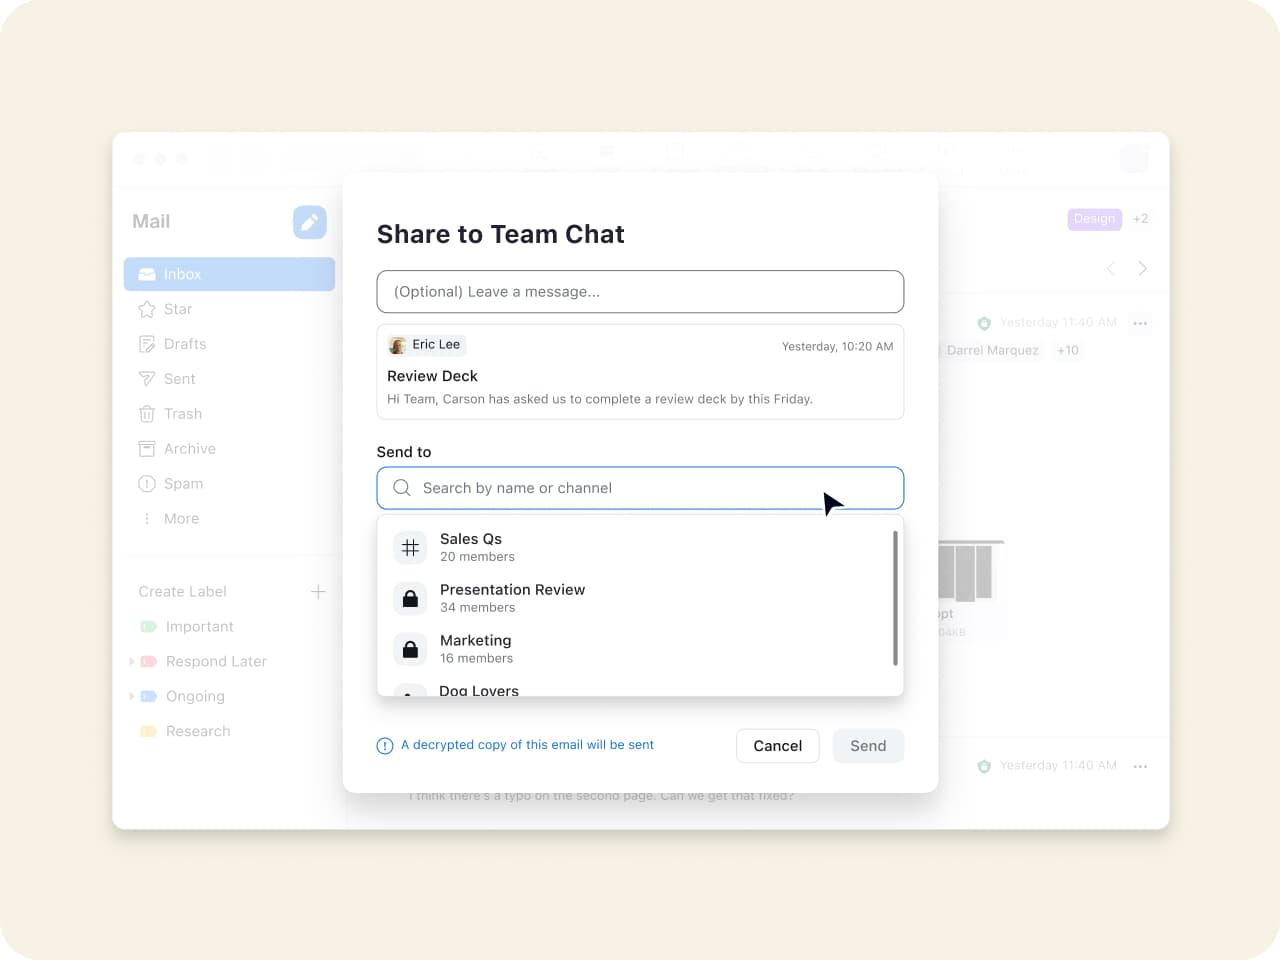 View email conversations in Team Chat